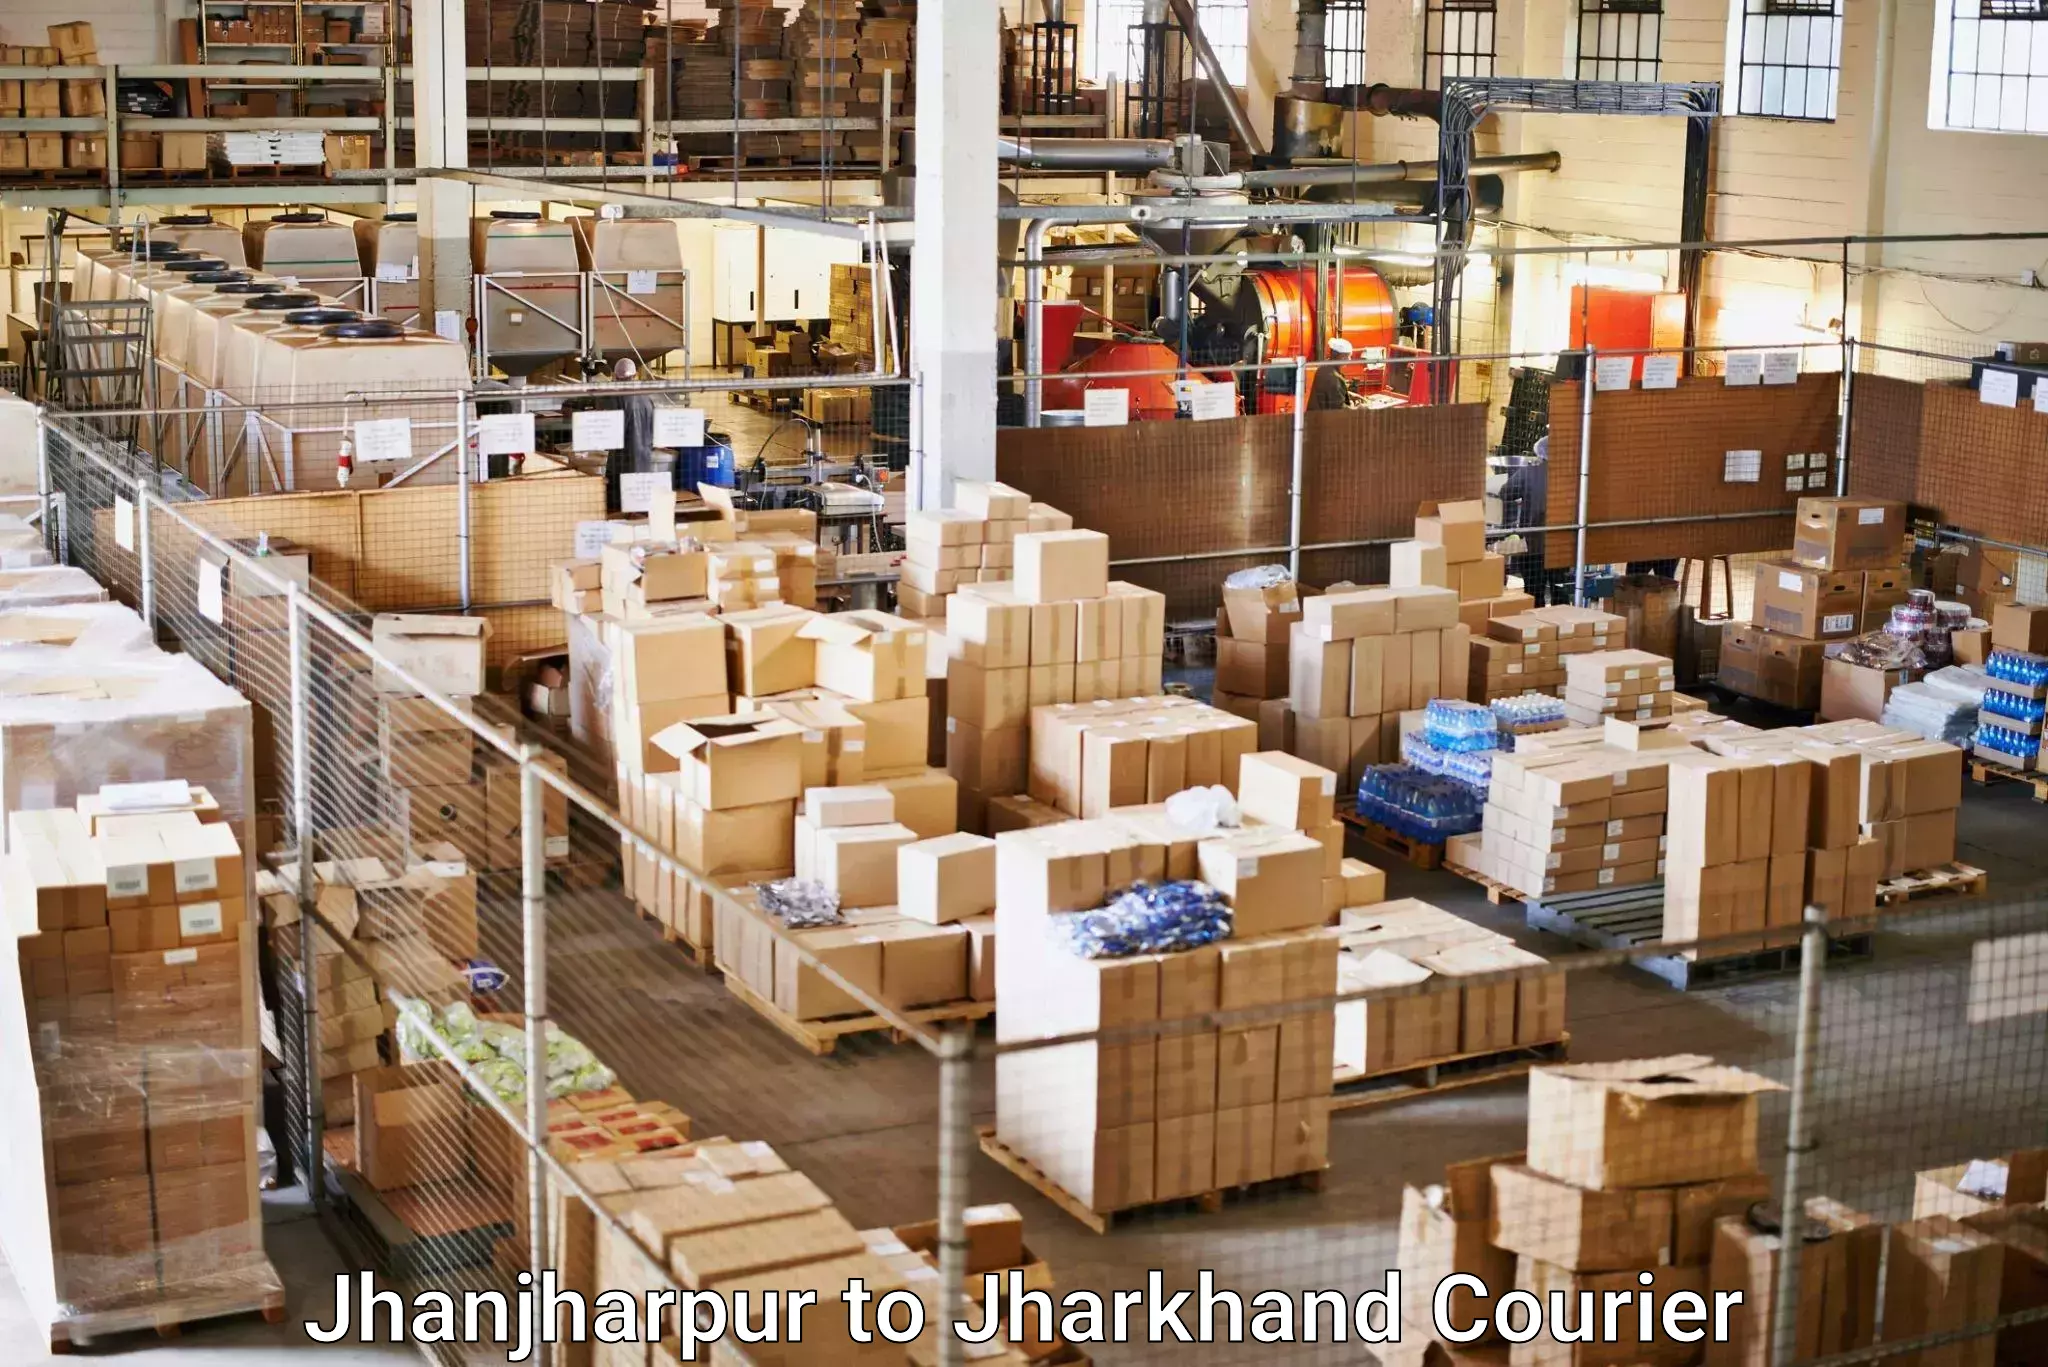 Air courier services in Jhanjharpur to Jharkhand